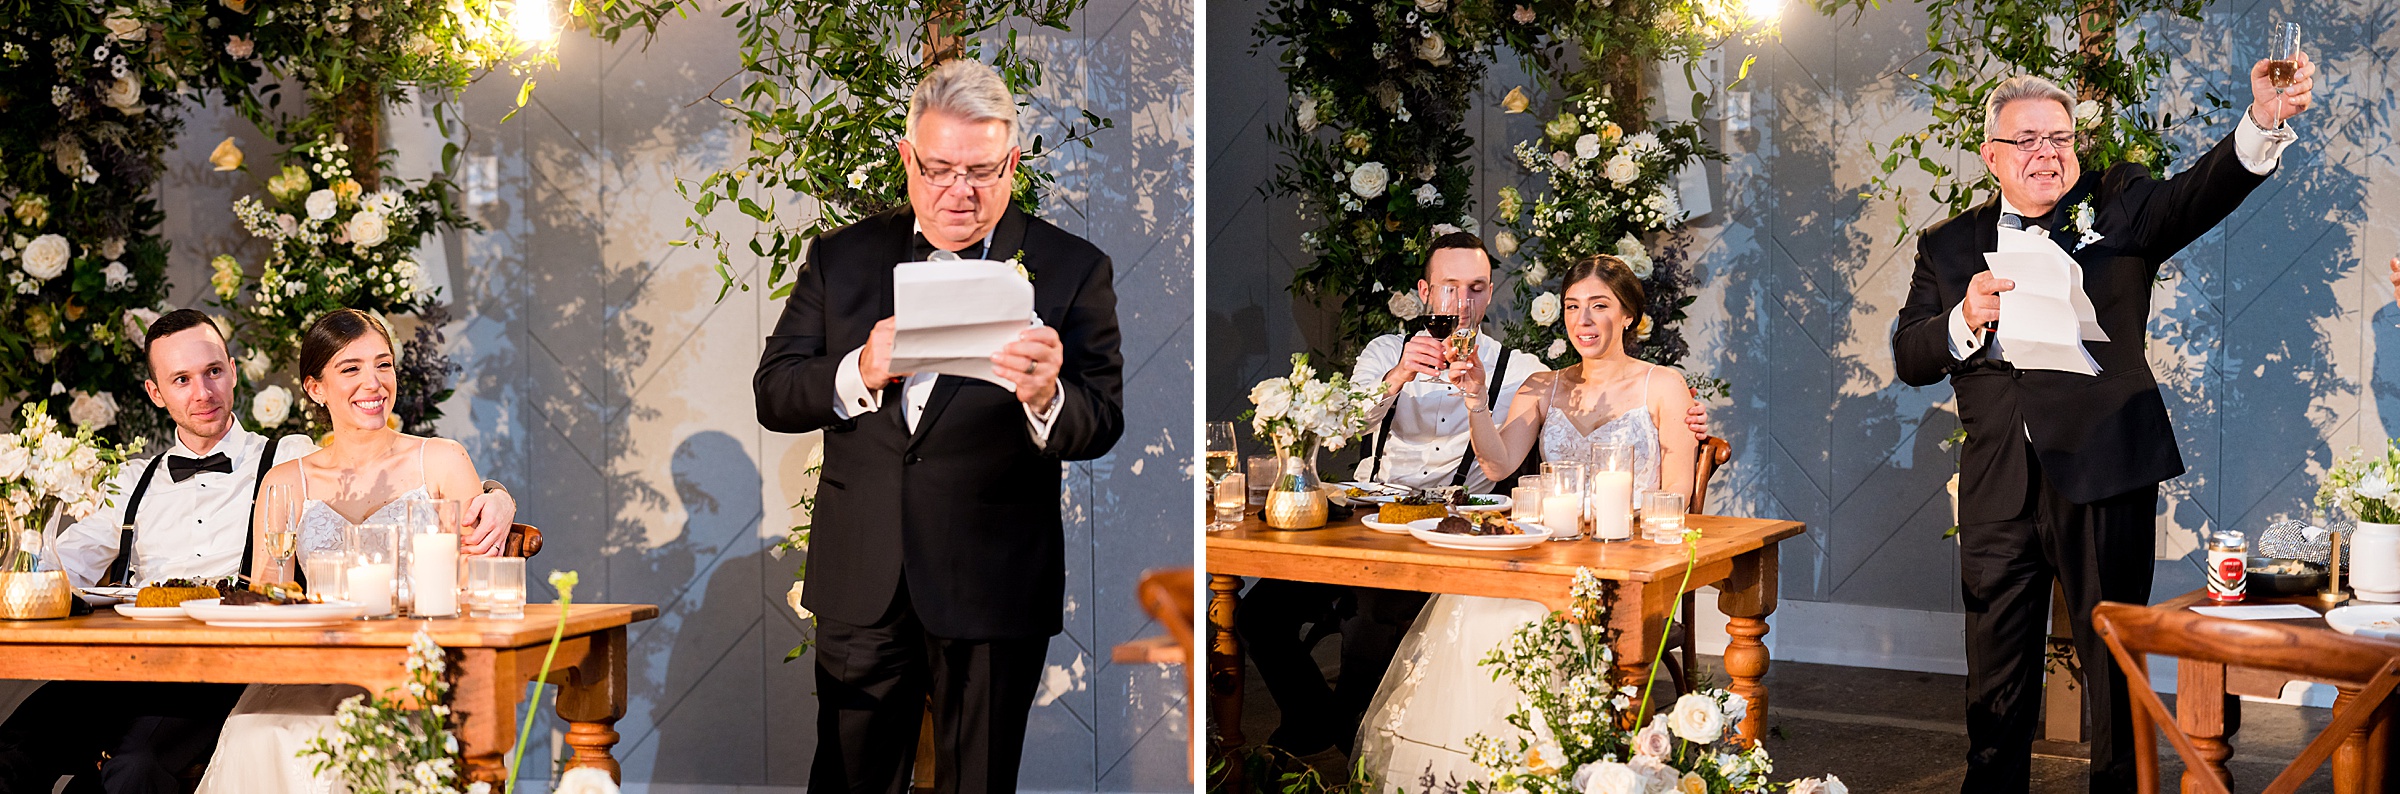 At a Lilah Events wedding, the bride and groom raise their glasses to give a toast.